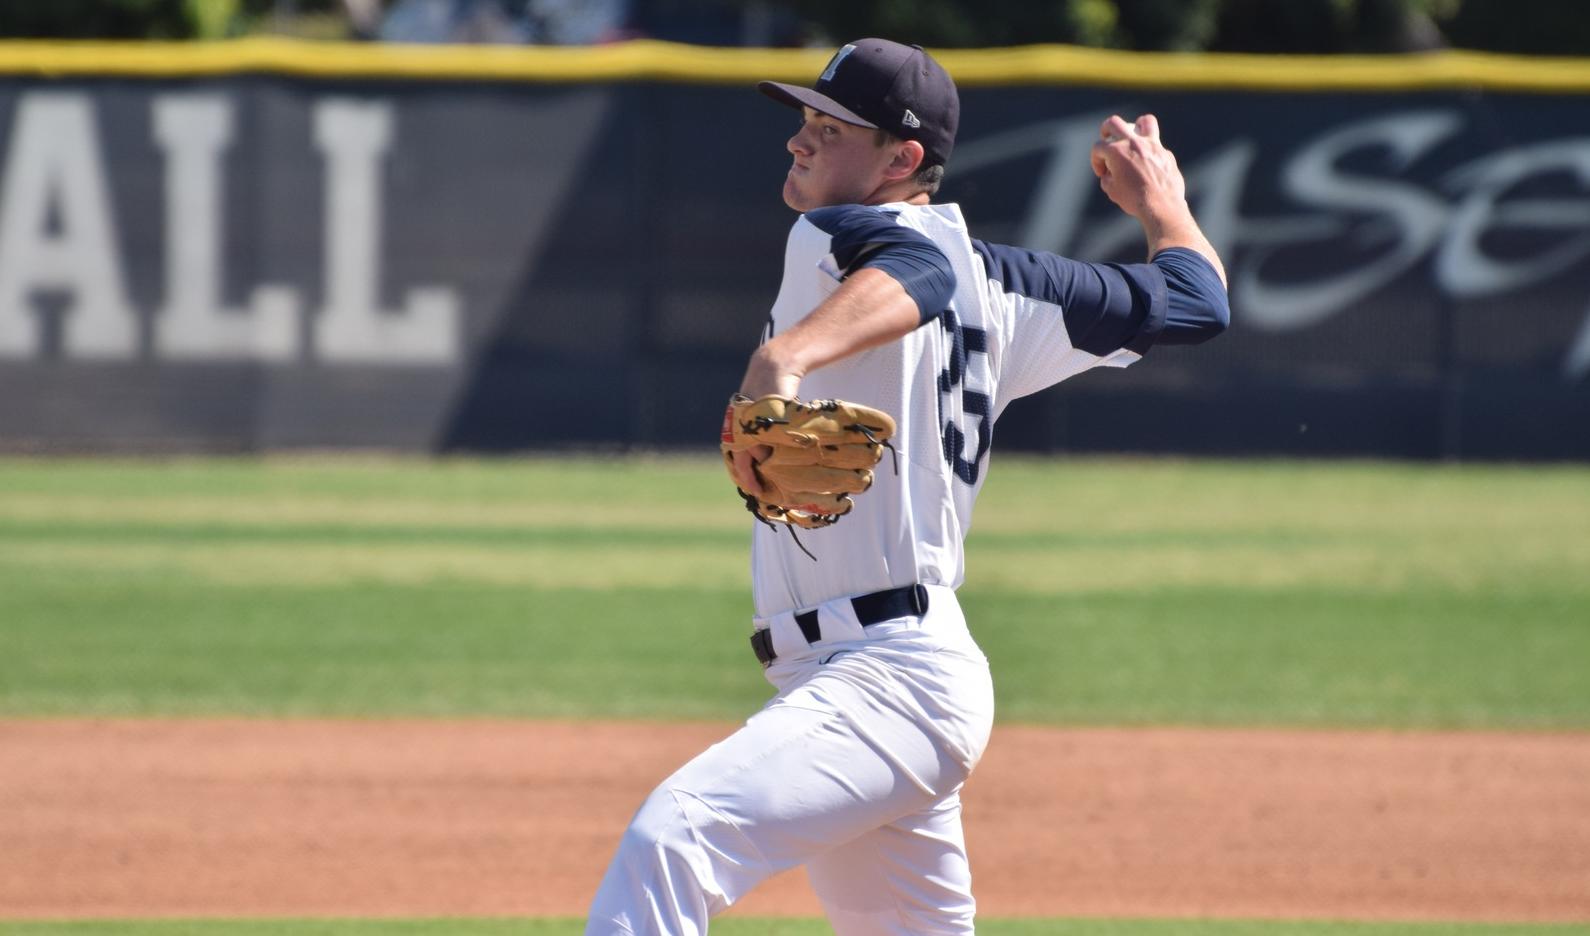 Irvine Valley battles back, but loses in 11 innings to Orange Coast